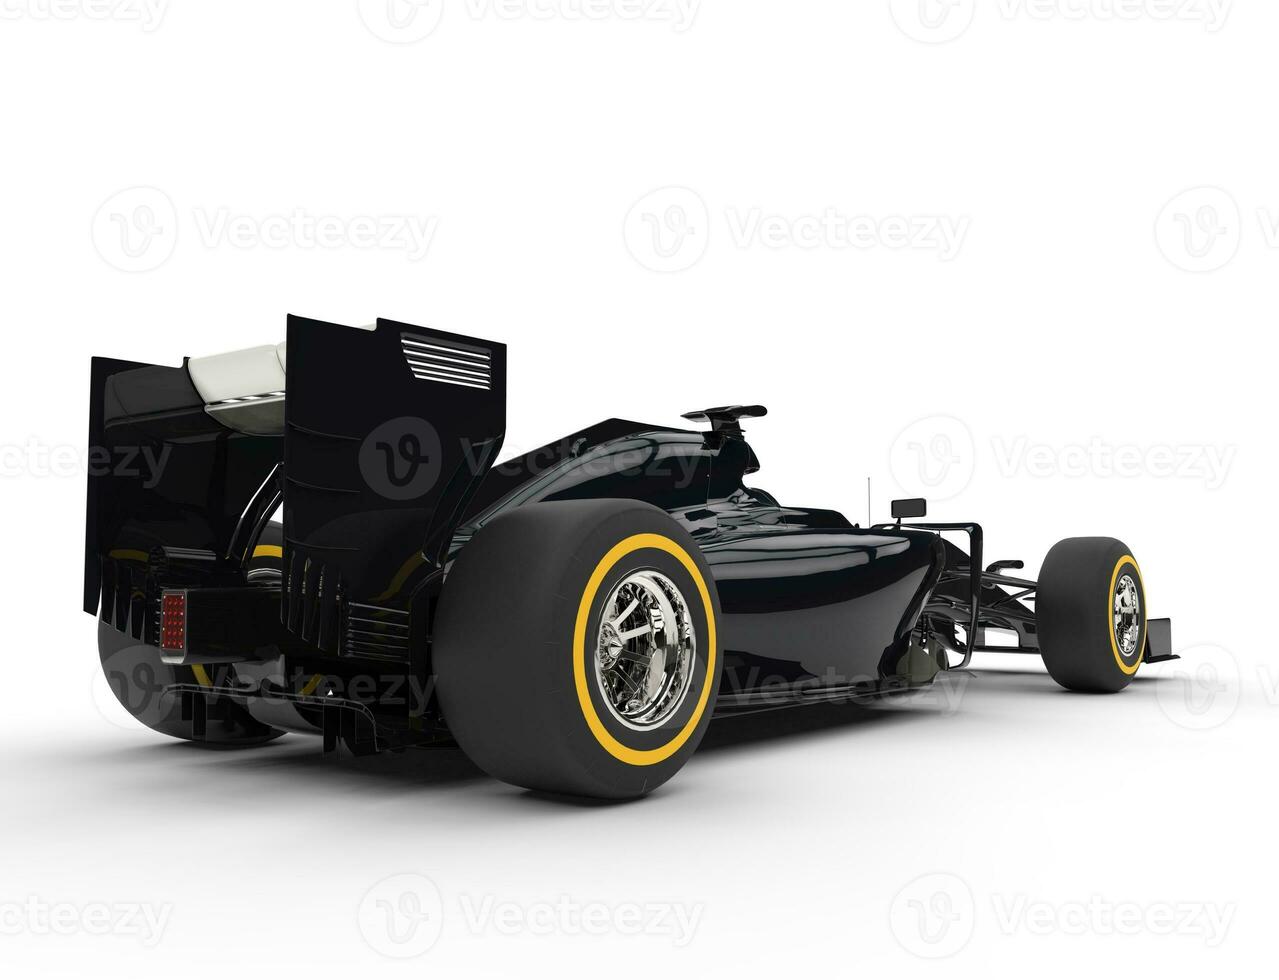 Black formula one car - tail view - isolated on white background. photo